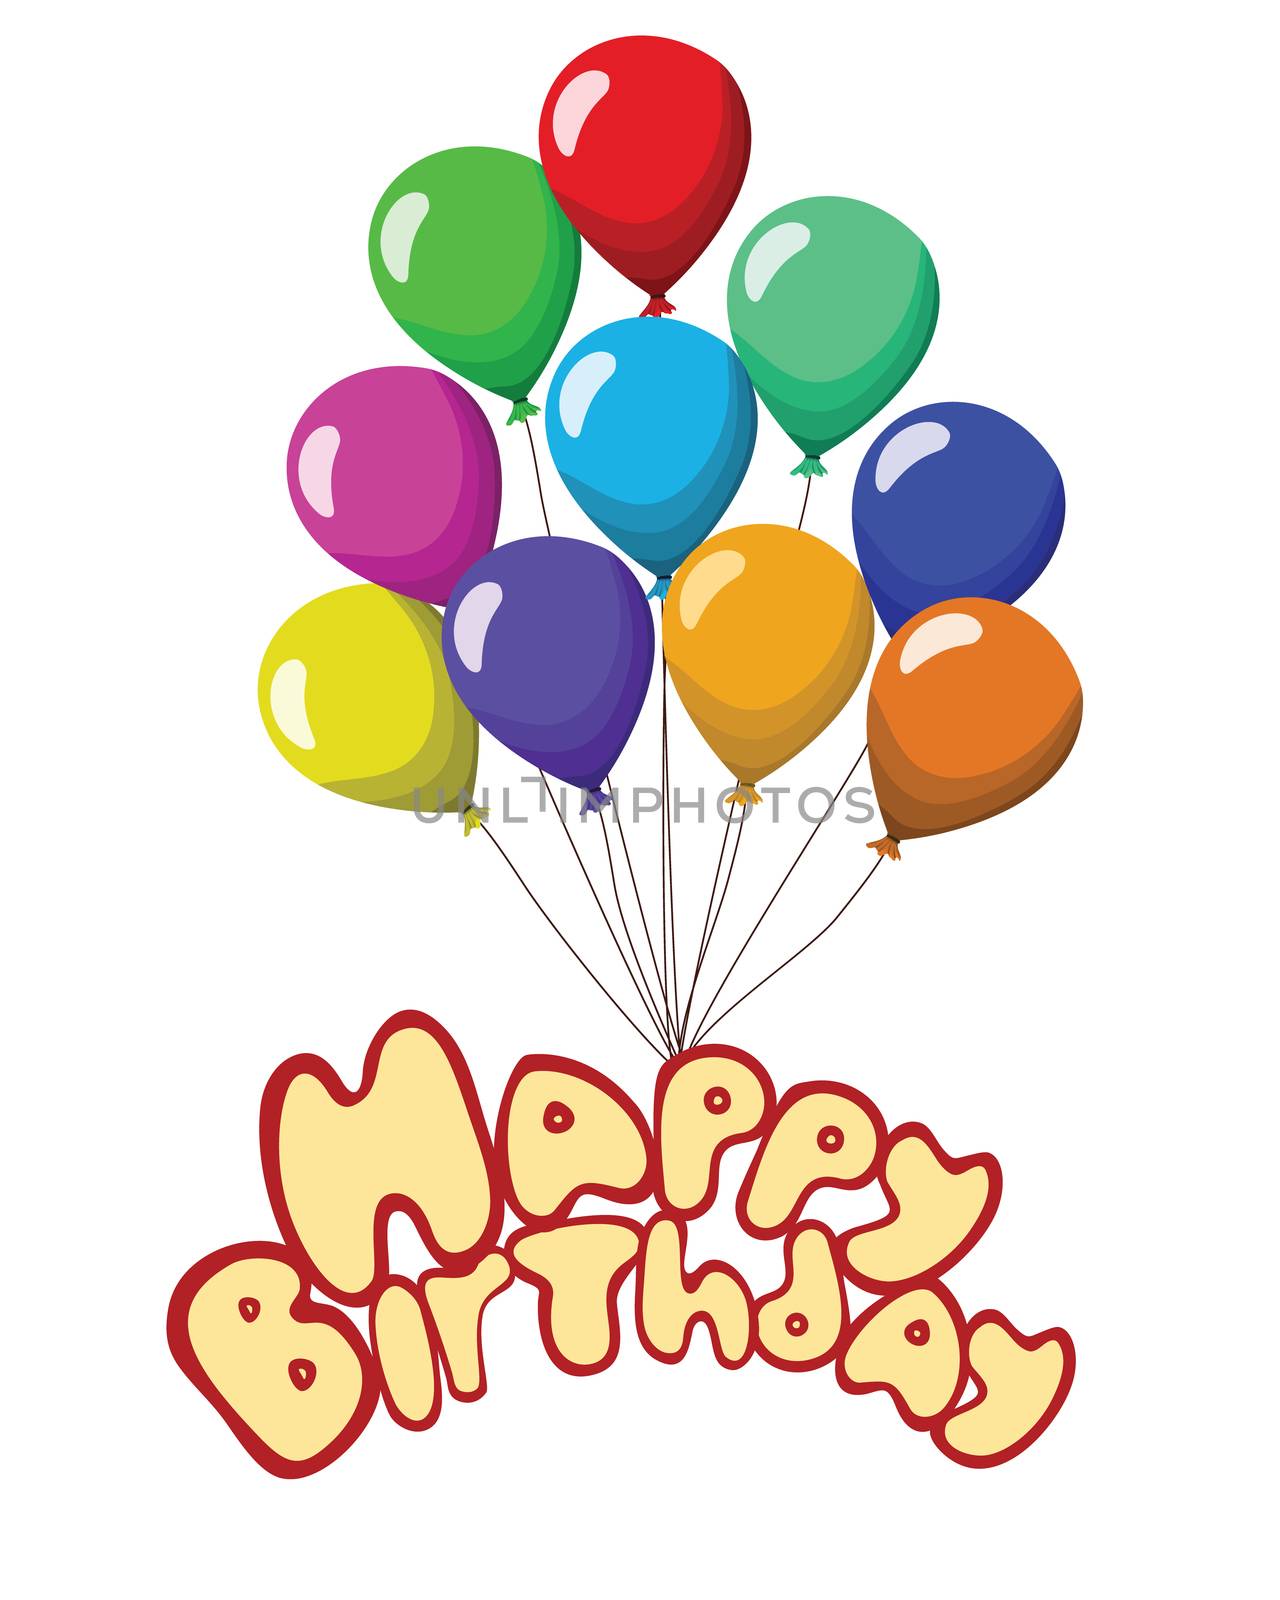 Happy birthday Text baloons ribbons isolated on white background.